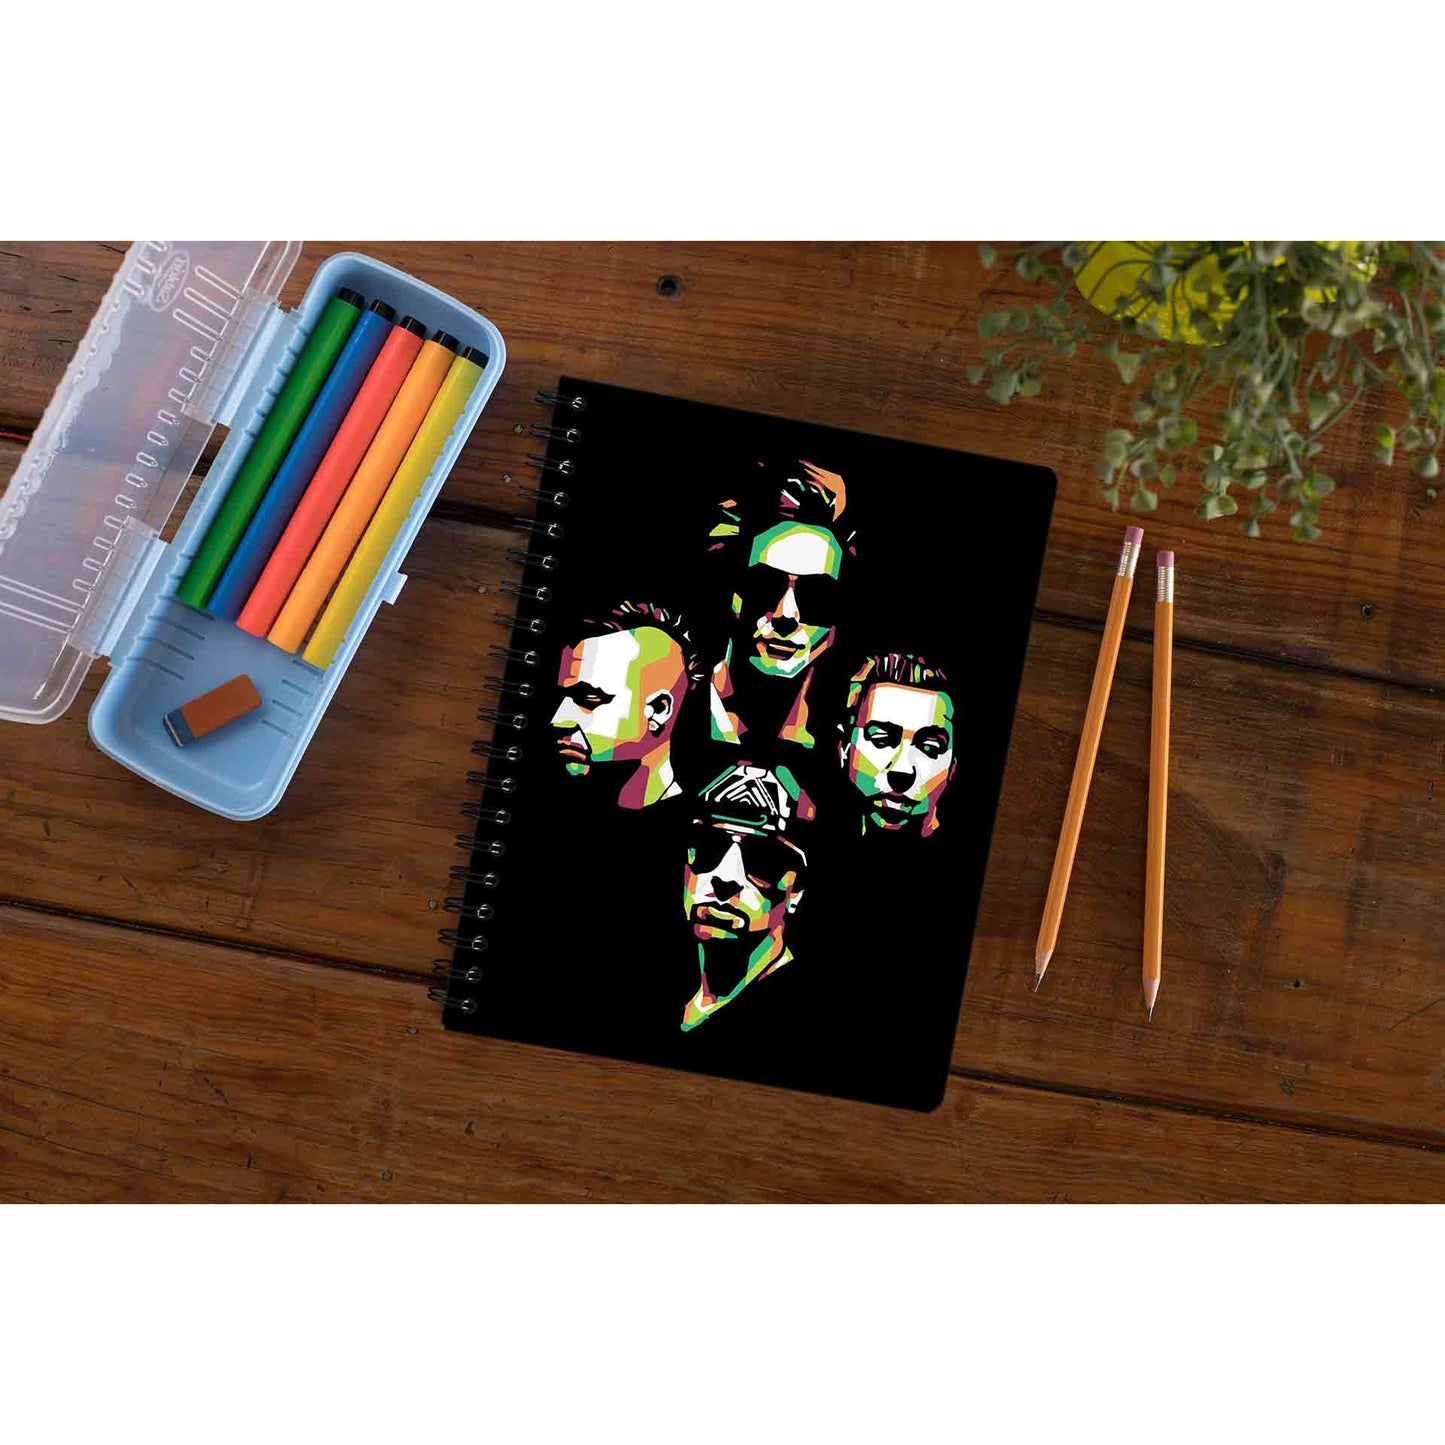 avenged sevenfold pop art notebook notepad diary buy online india the banyan tee tbt unruled